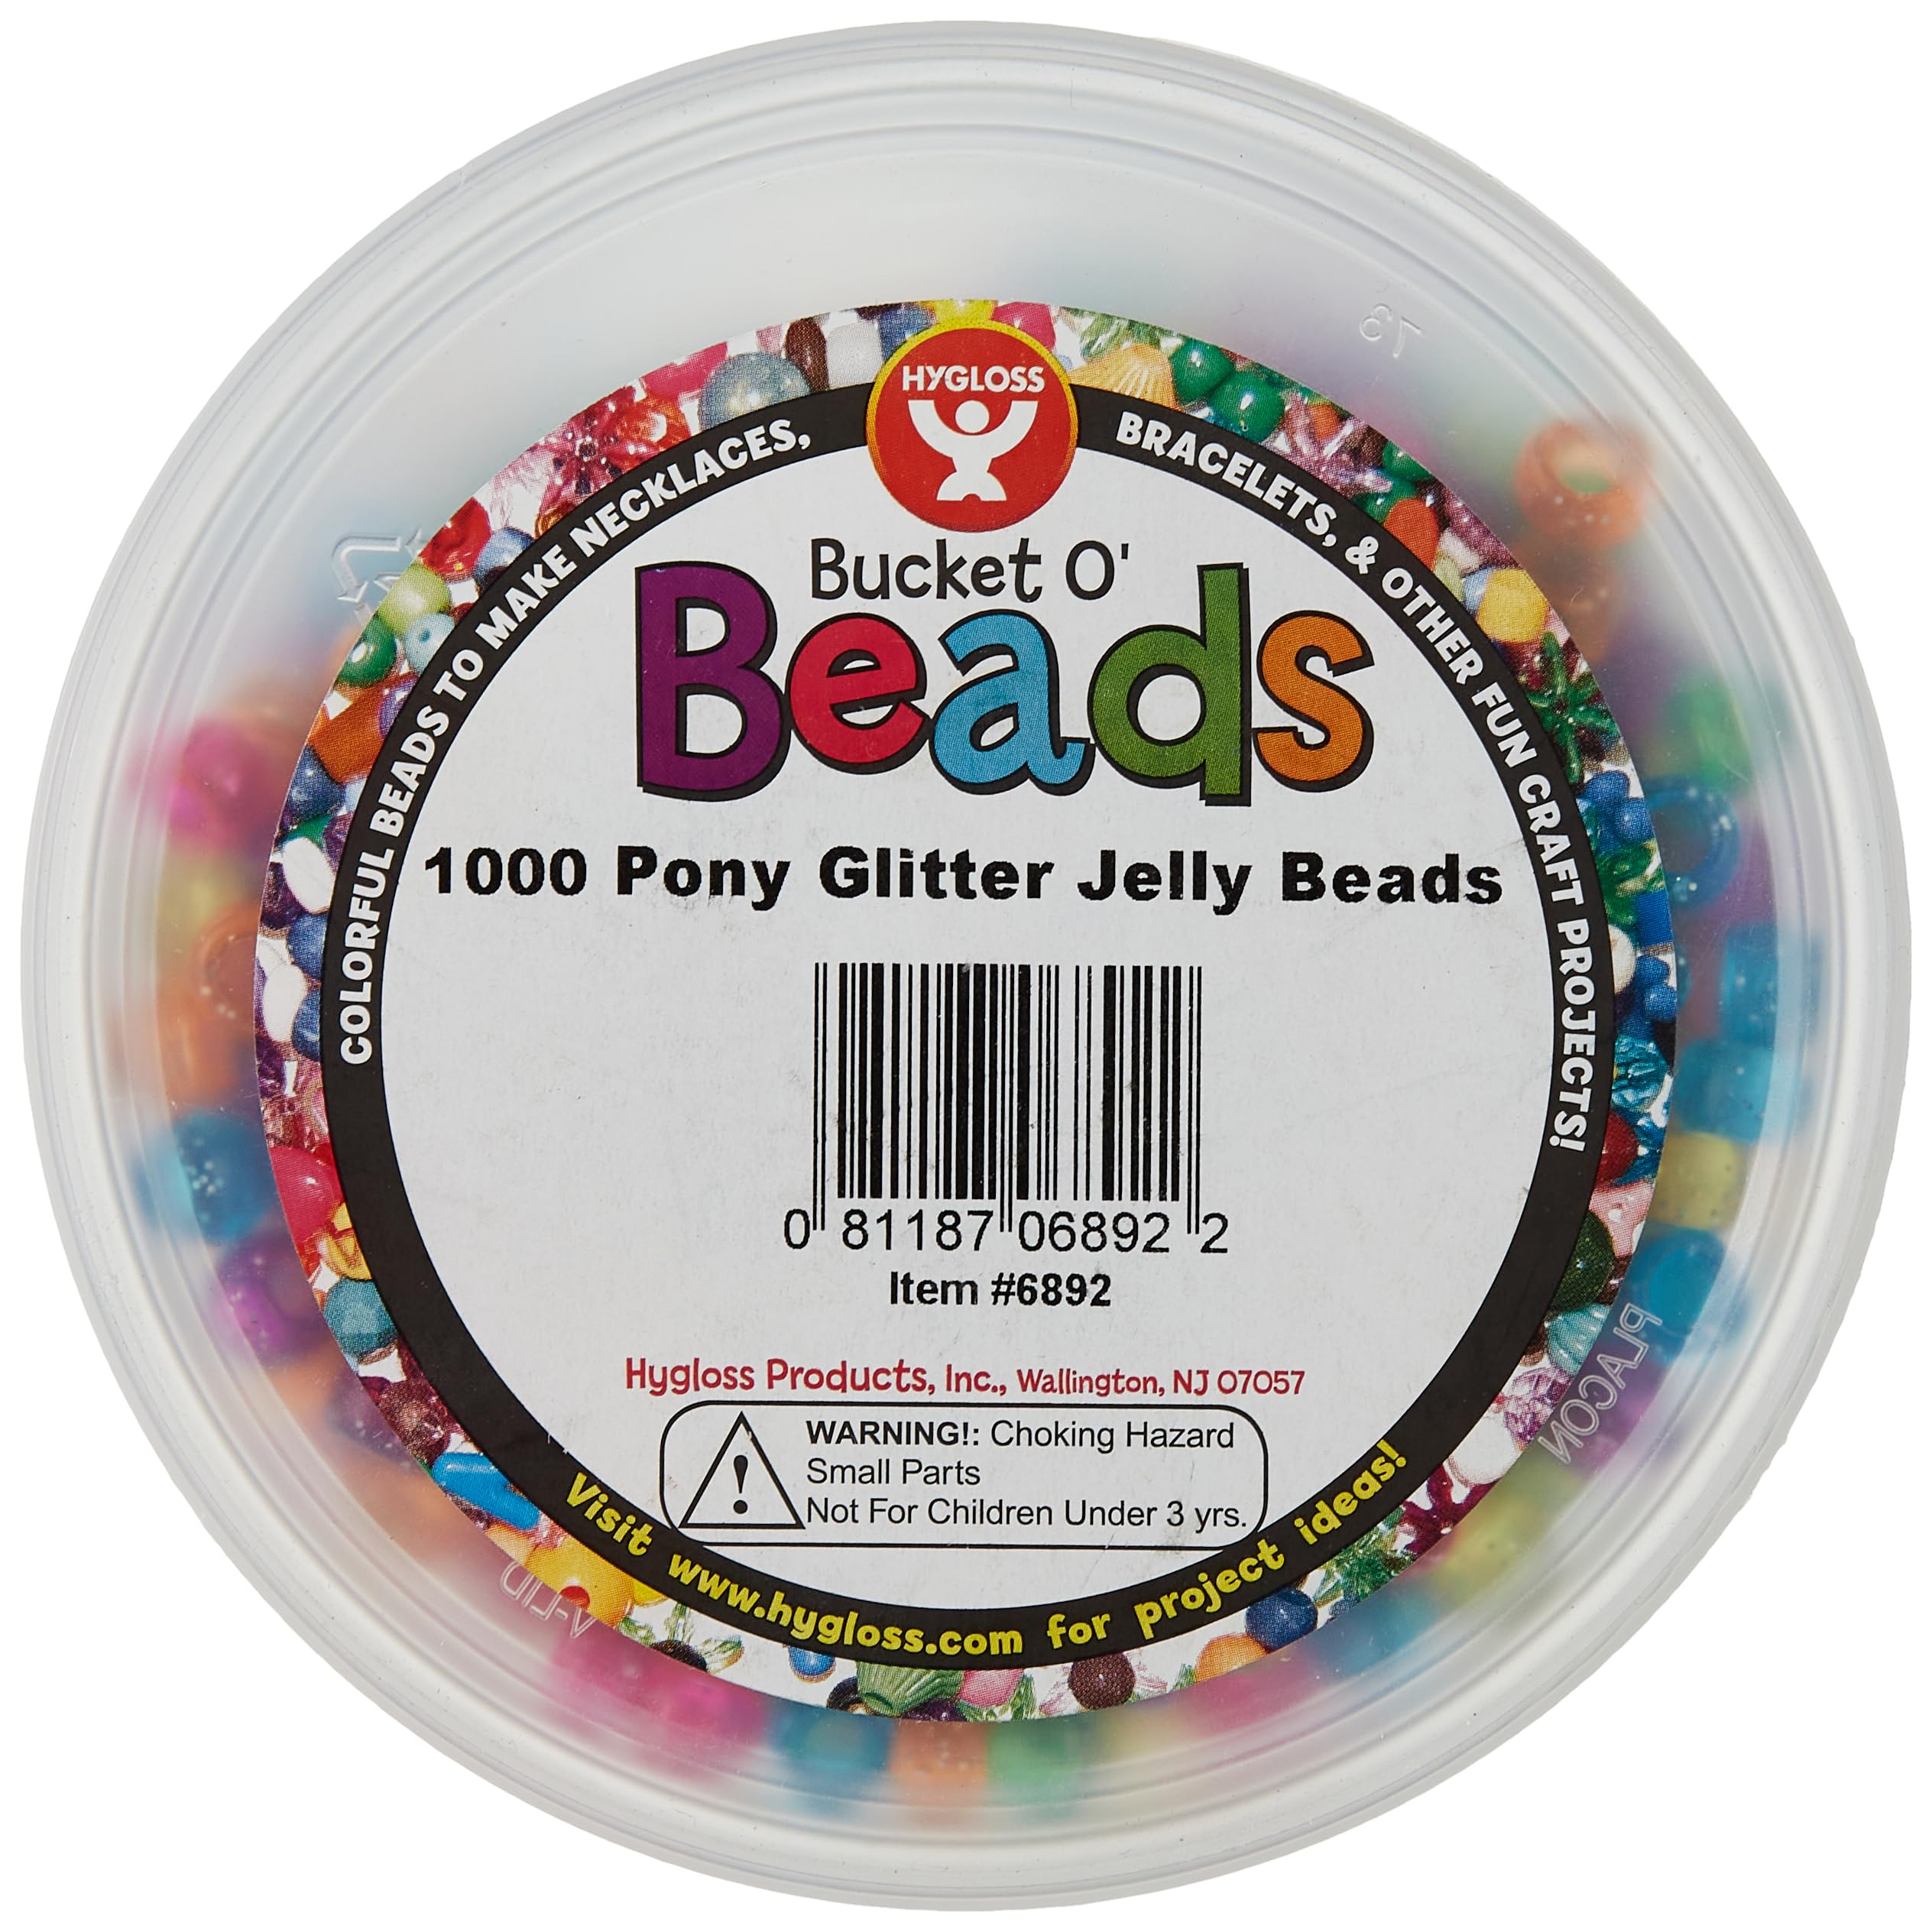 Hygloss Products Bucket O’Beads - Plastic Pony Bead Assortment for Crafts, Jewelry, Keychains and More - Reusable Container - Glitter Jelly Assorted Colors - 6x9 mm - 1,000 Pcs,6892